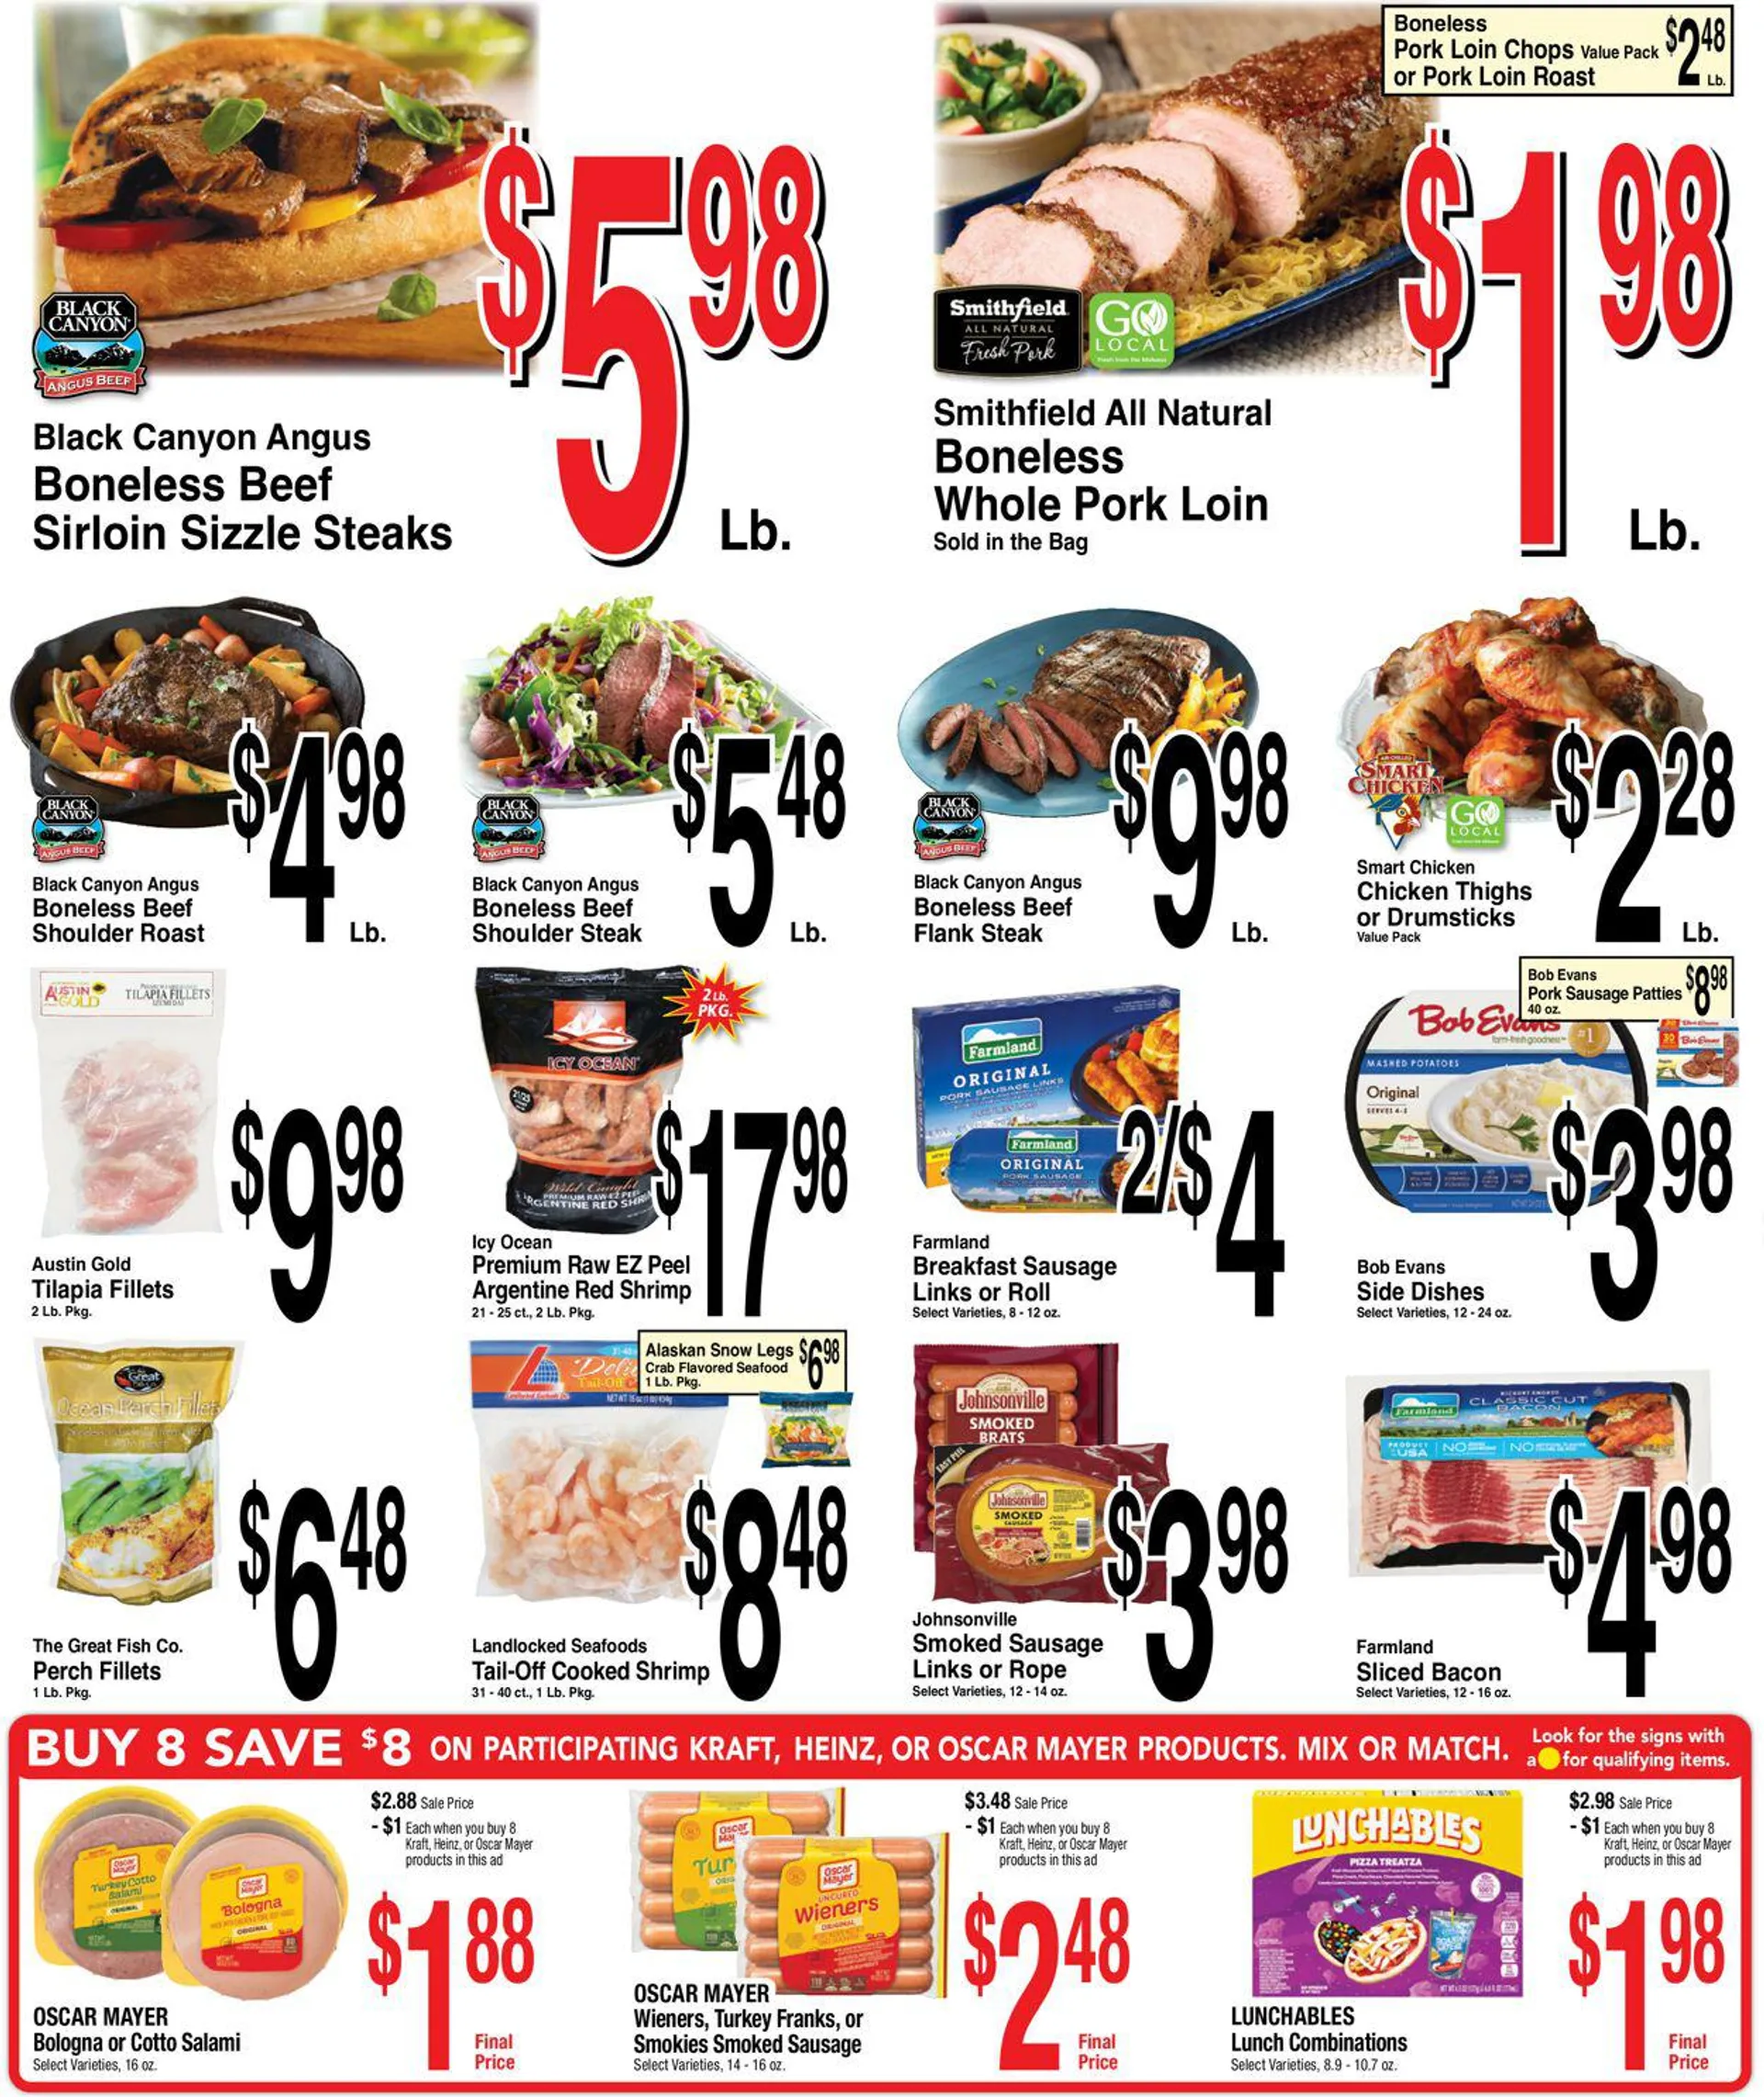 Super Saver Current weekly ad - 2